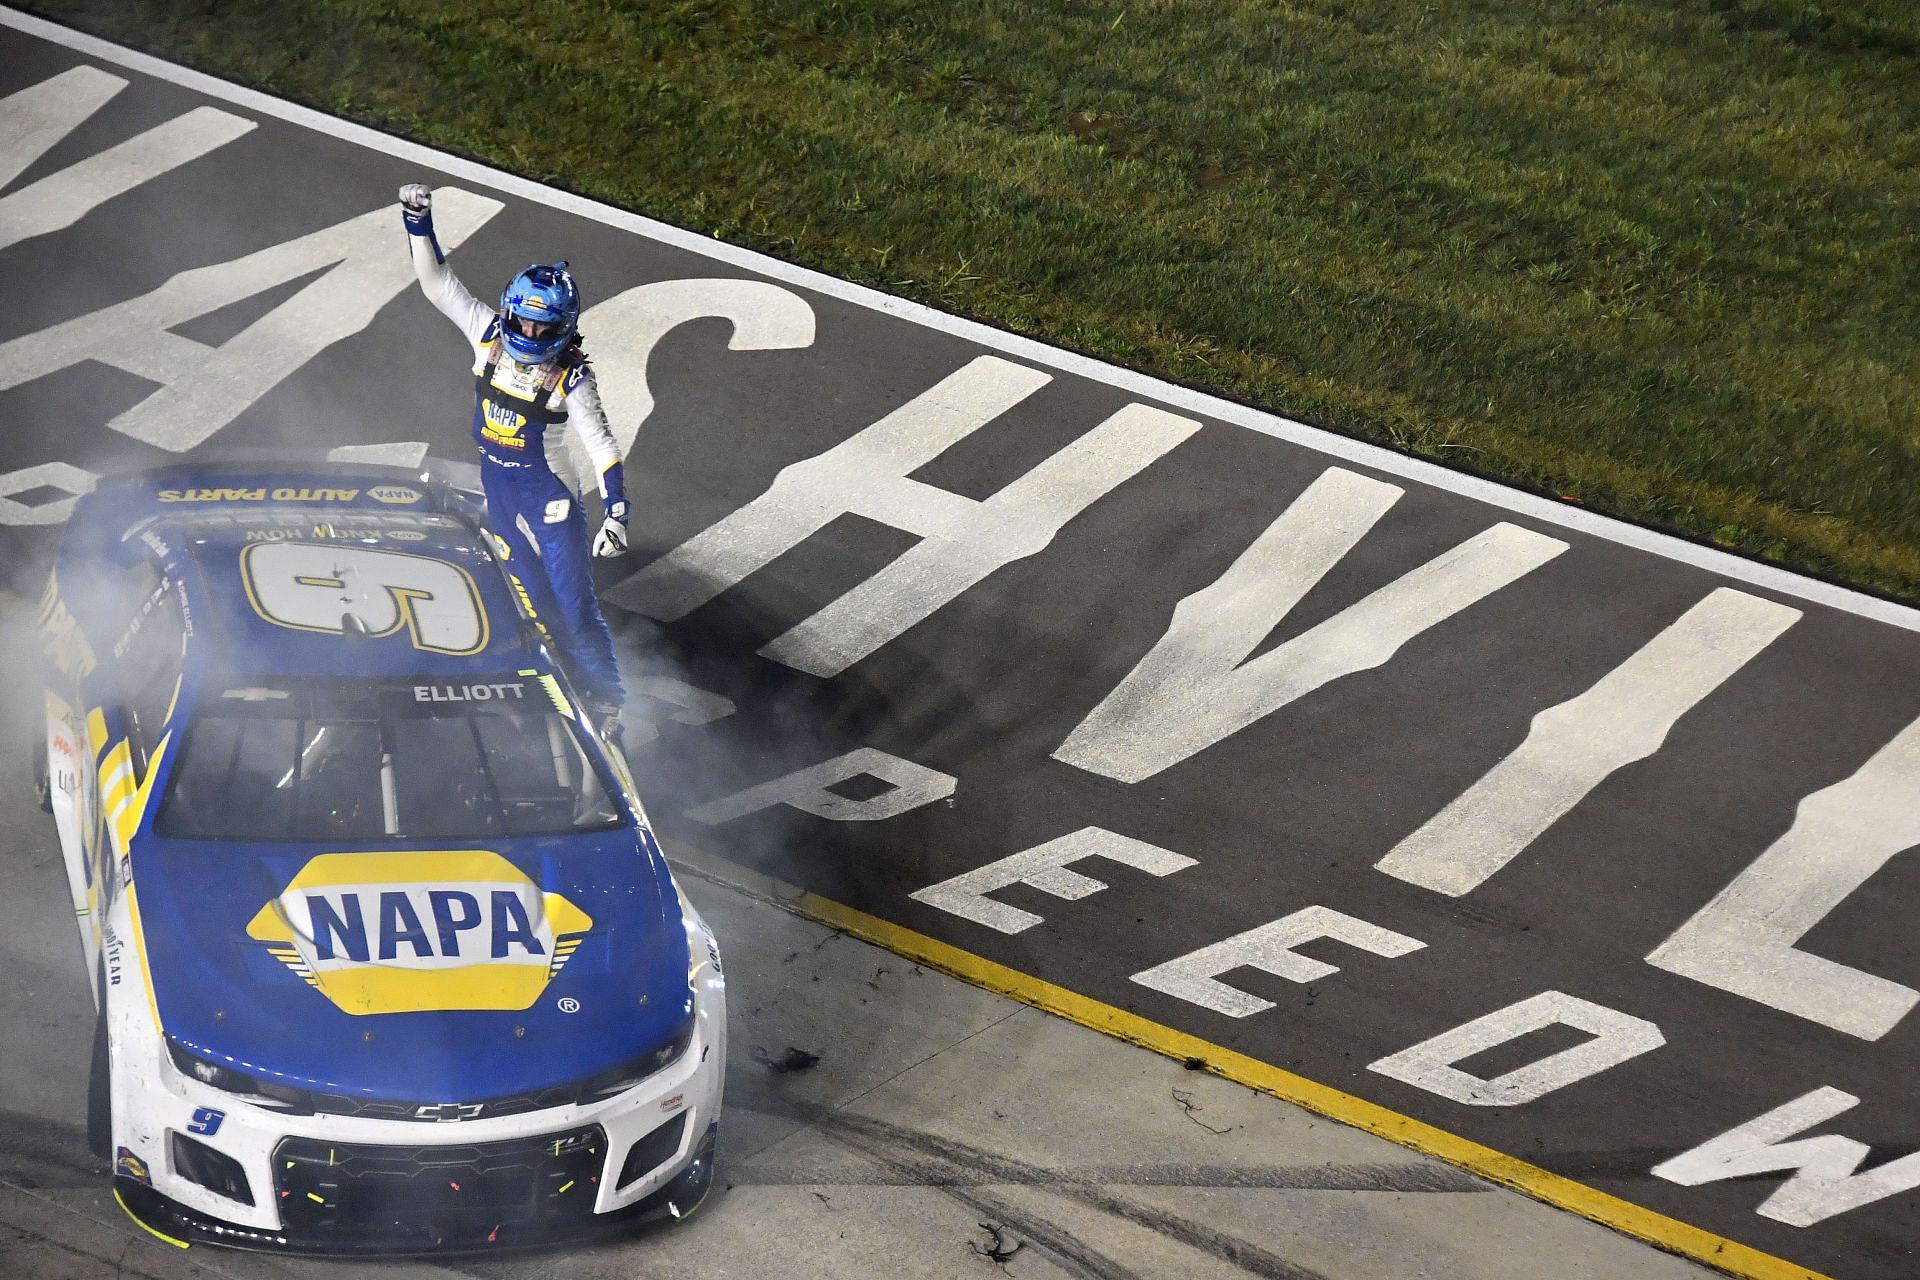 NASCAR dug its own hole with Chase Elliott incident